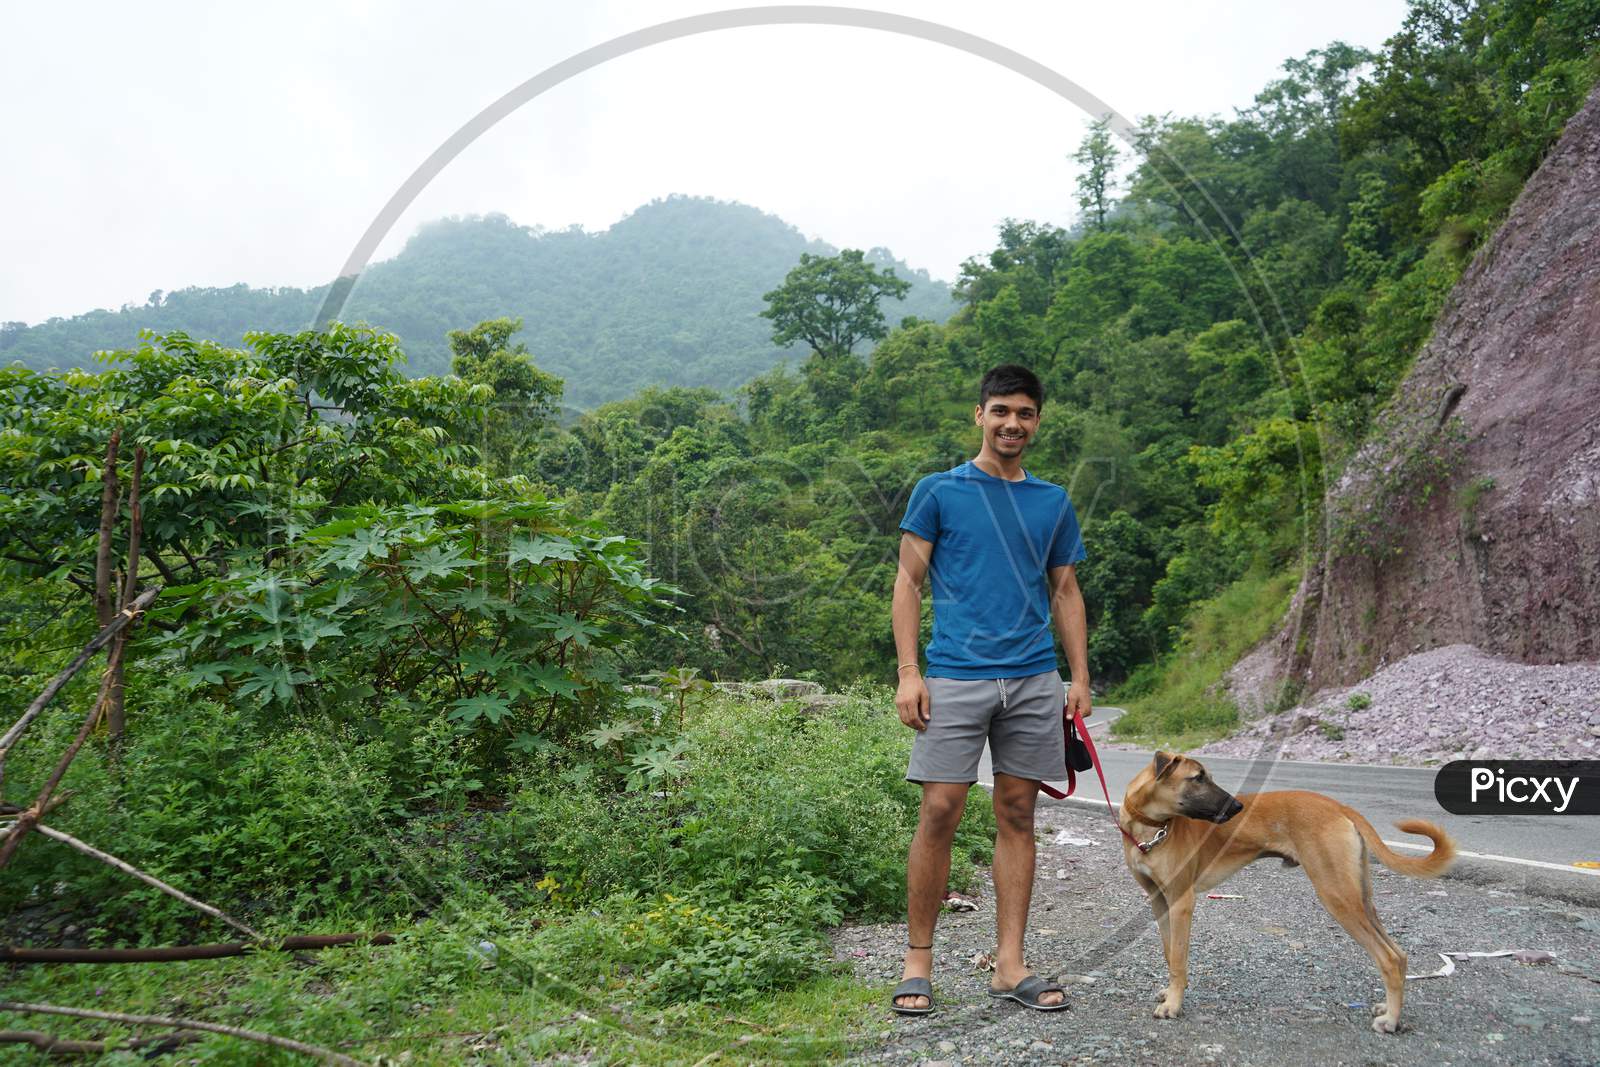 Young Man With His Dog Standing Beside A Road With Blurred Mountains In The Background.